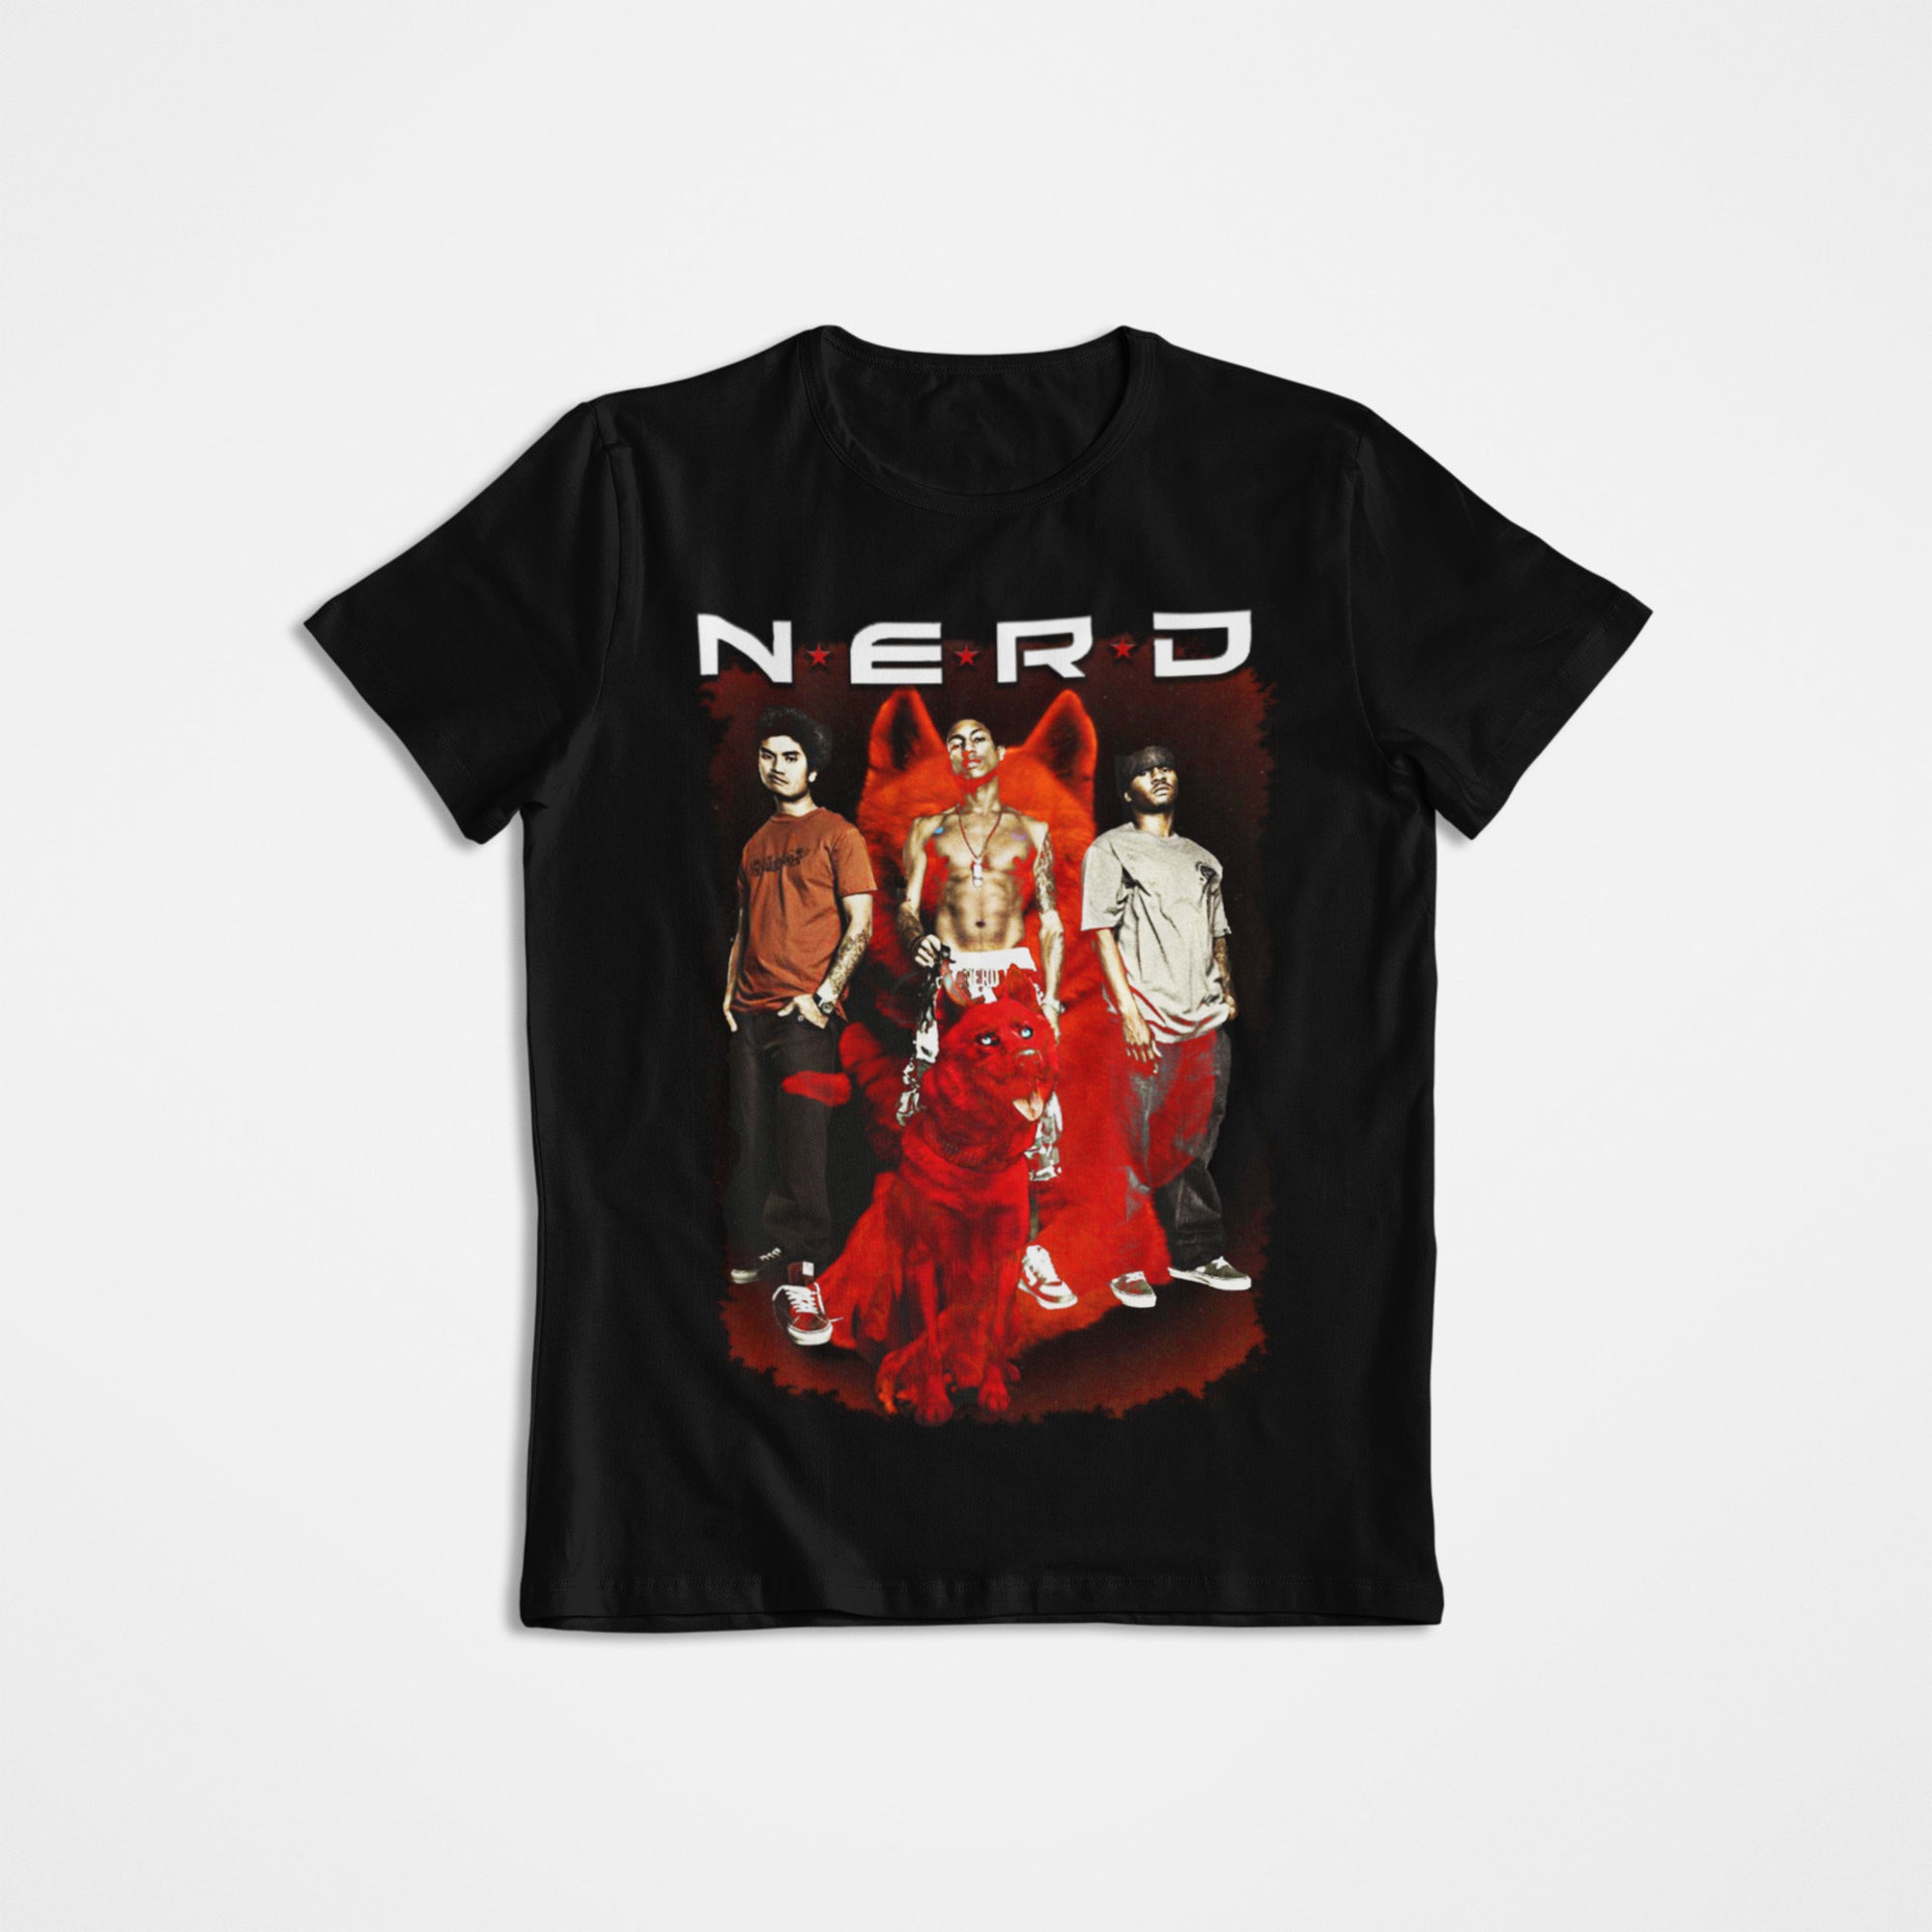 Discover Vintage Graphic T-Shirt, Graphic Tee ~ NERD, The Neptunes, Pharell, Hip Hop